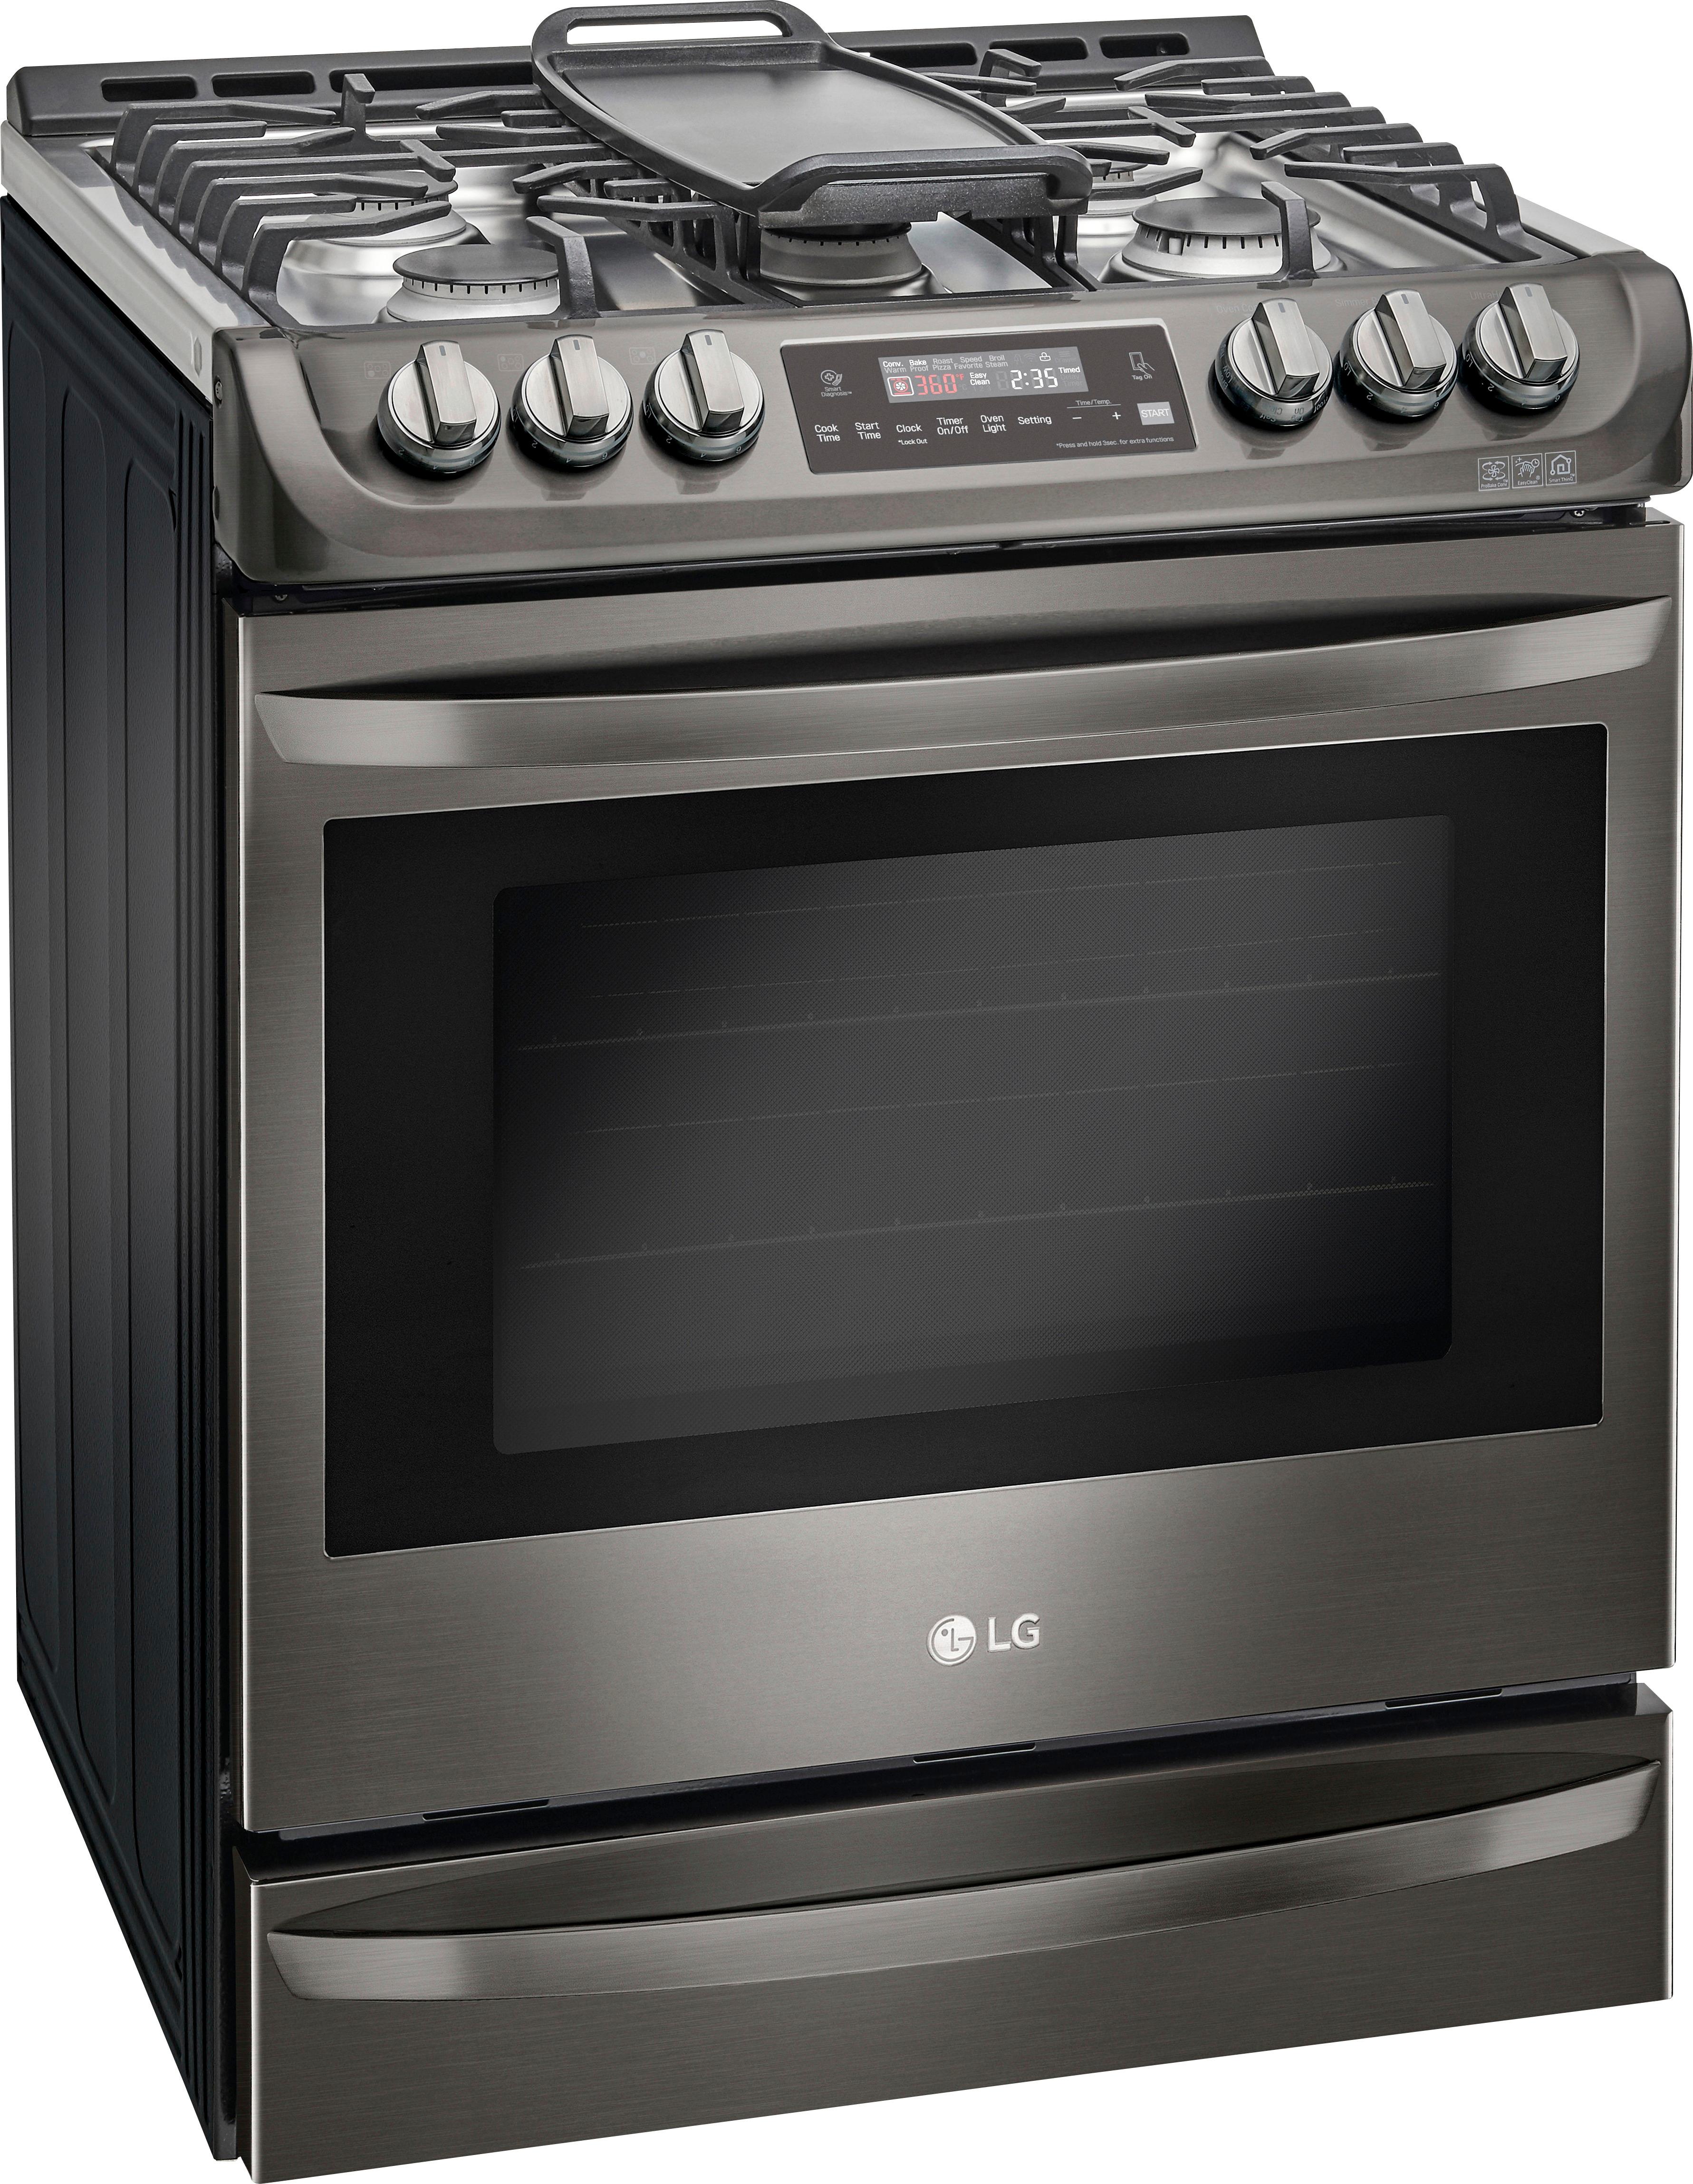 Angle View: KitchenAid - 6.0 Cu. Ft. Self-Cleaning Free-Standing Double Oven Gas Convection Range - Stainless steel